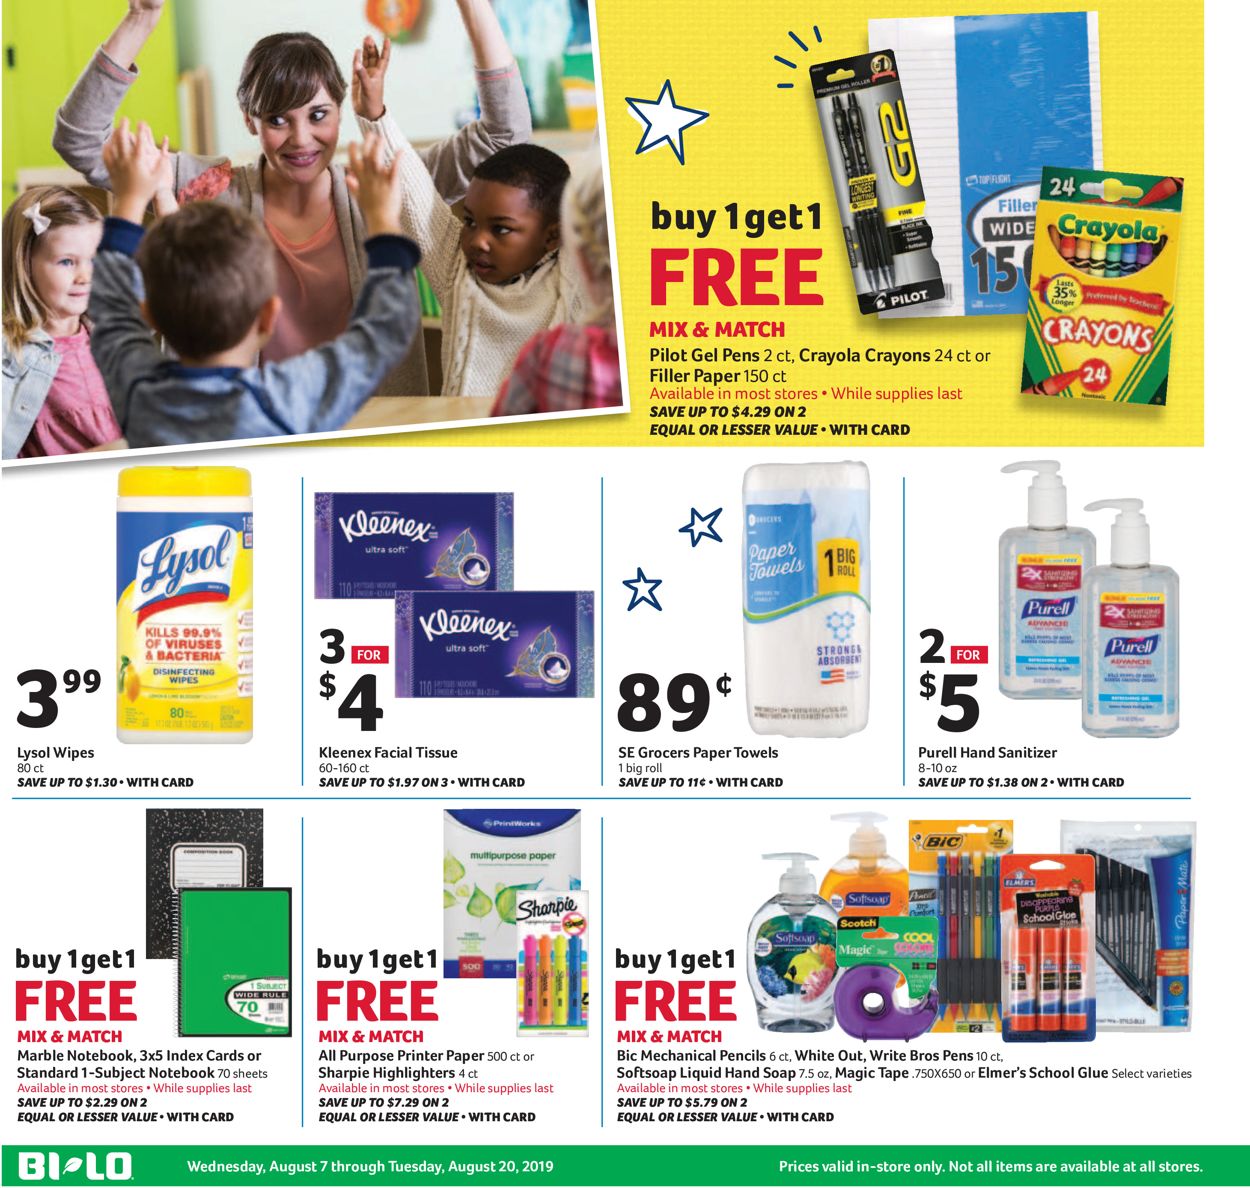 BI-LO Current weekly ad 08/07 - 08/20/2019 8 - frequent ...